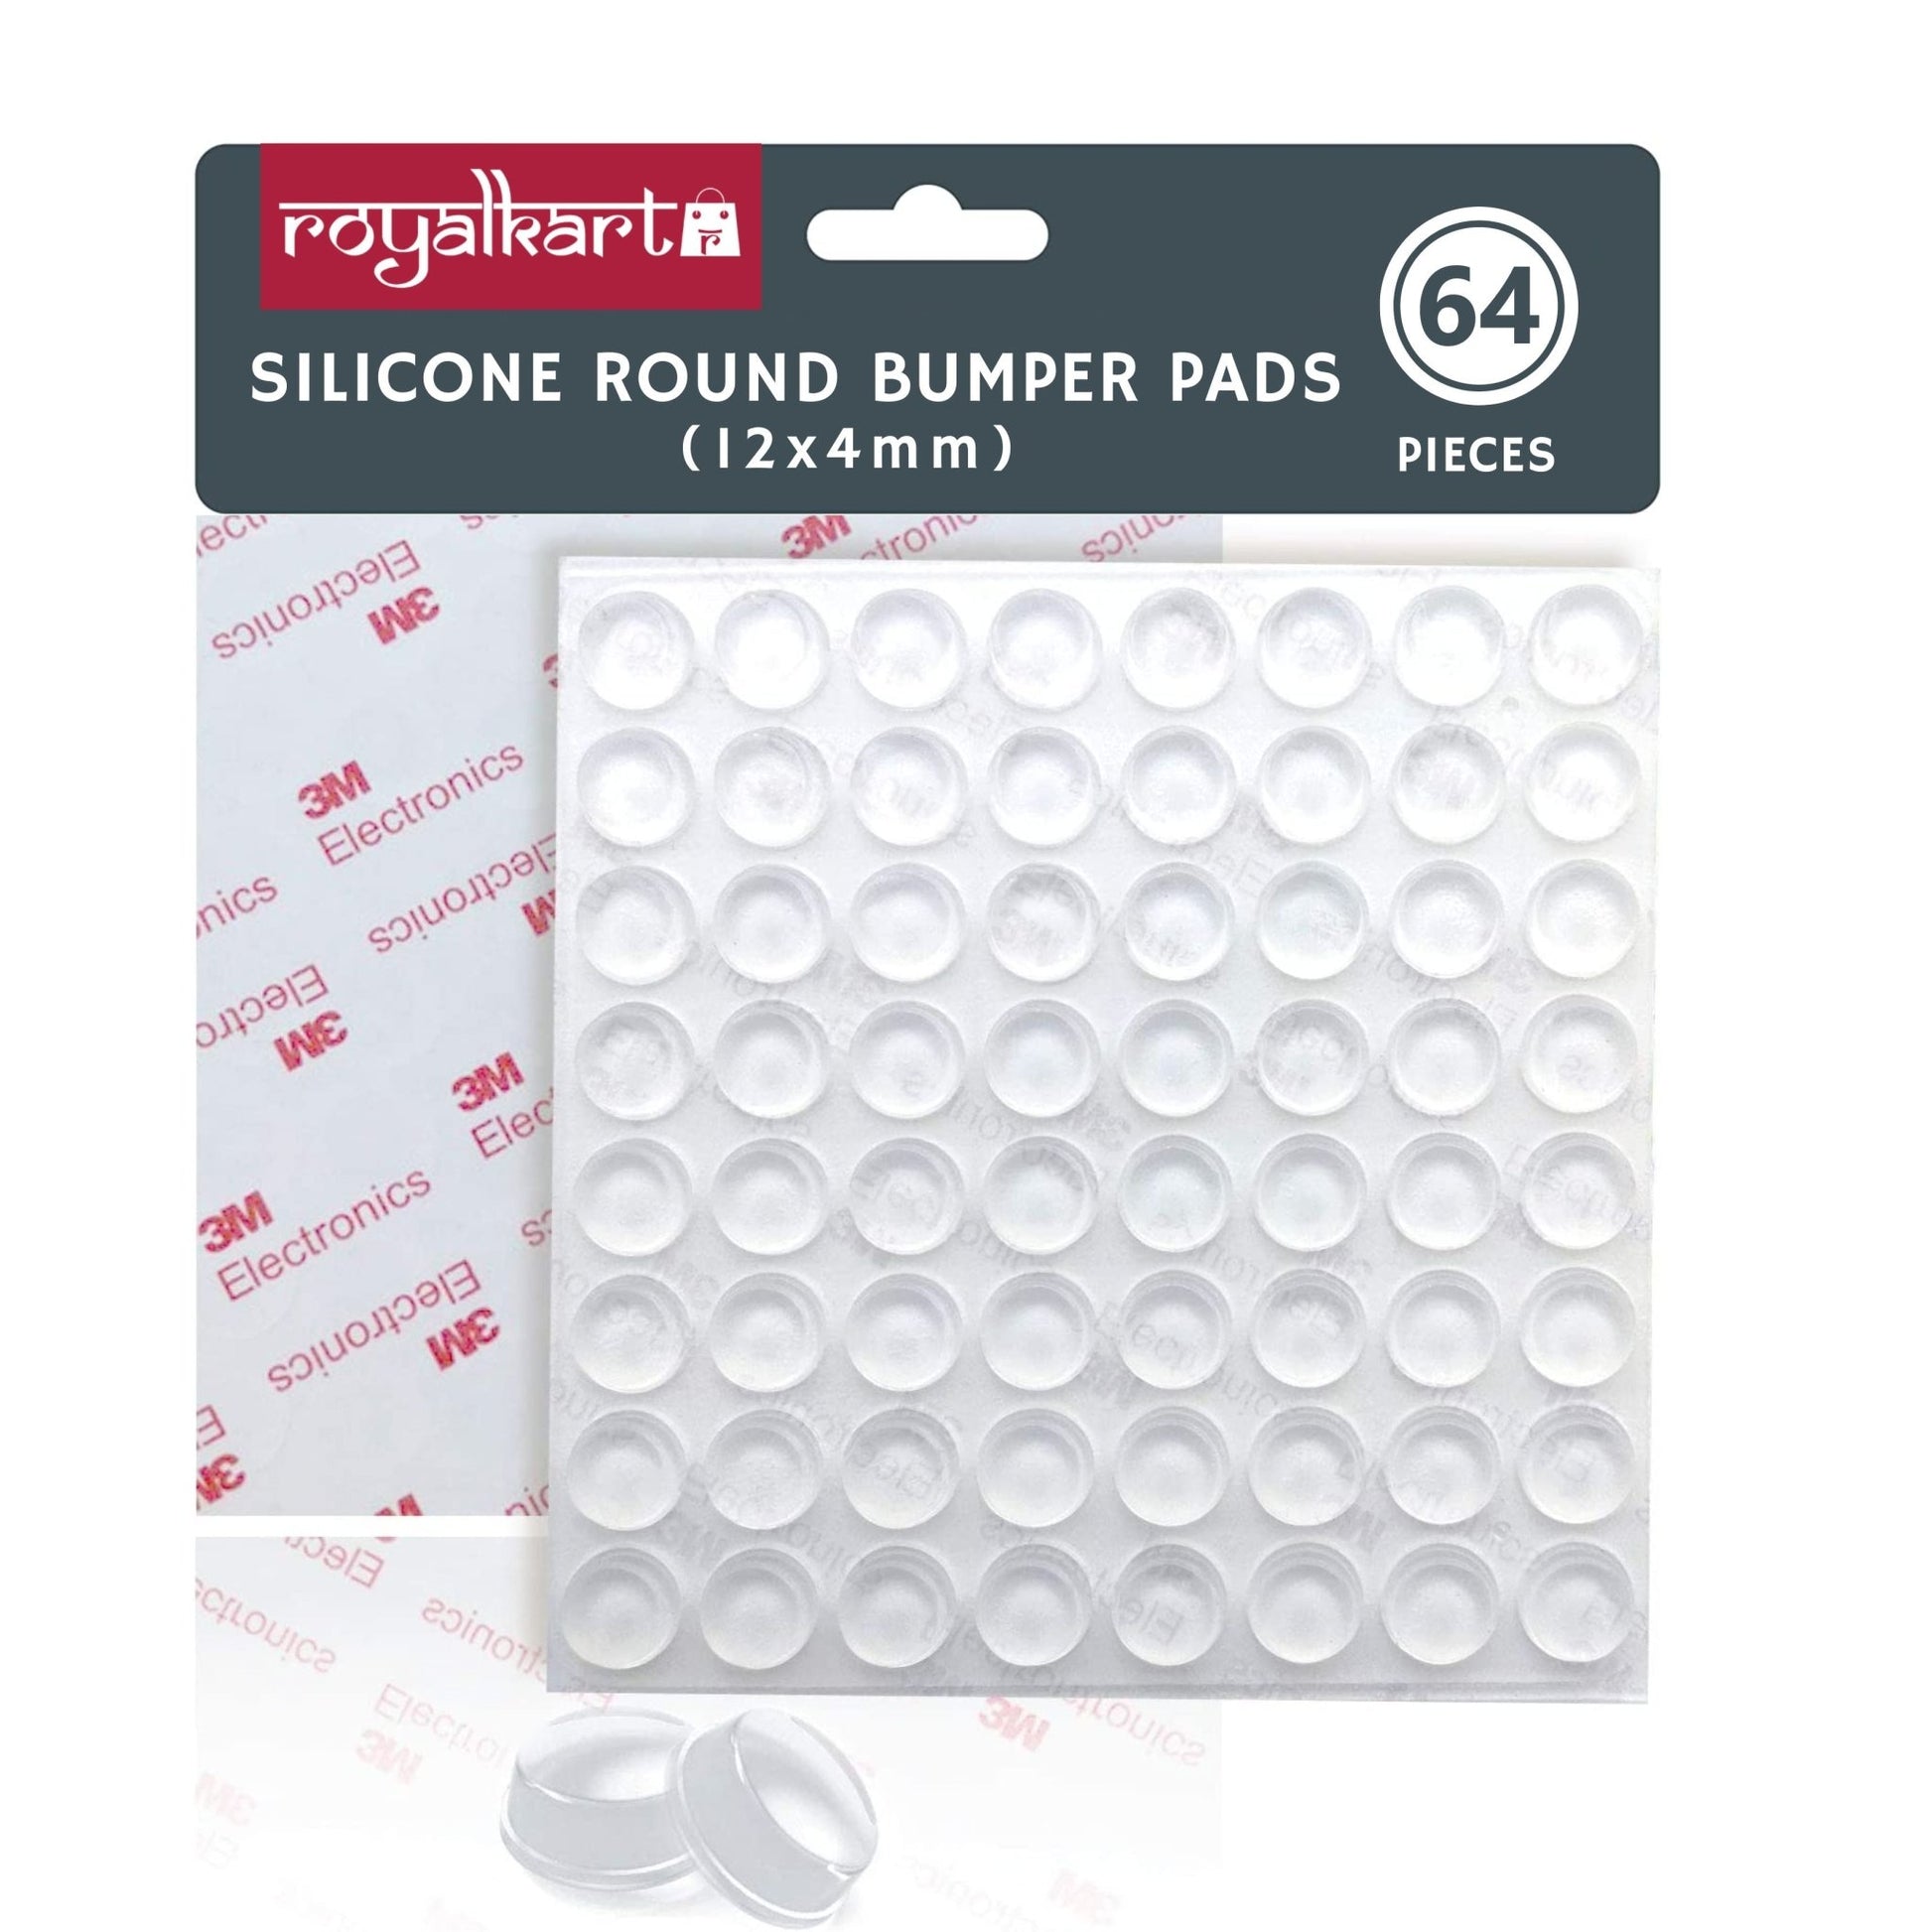 Silicone Bumper Pads For Furniture furniture pads- Royalkart - The Urban Store